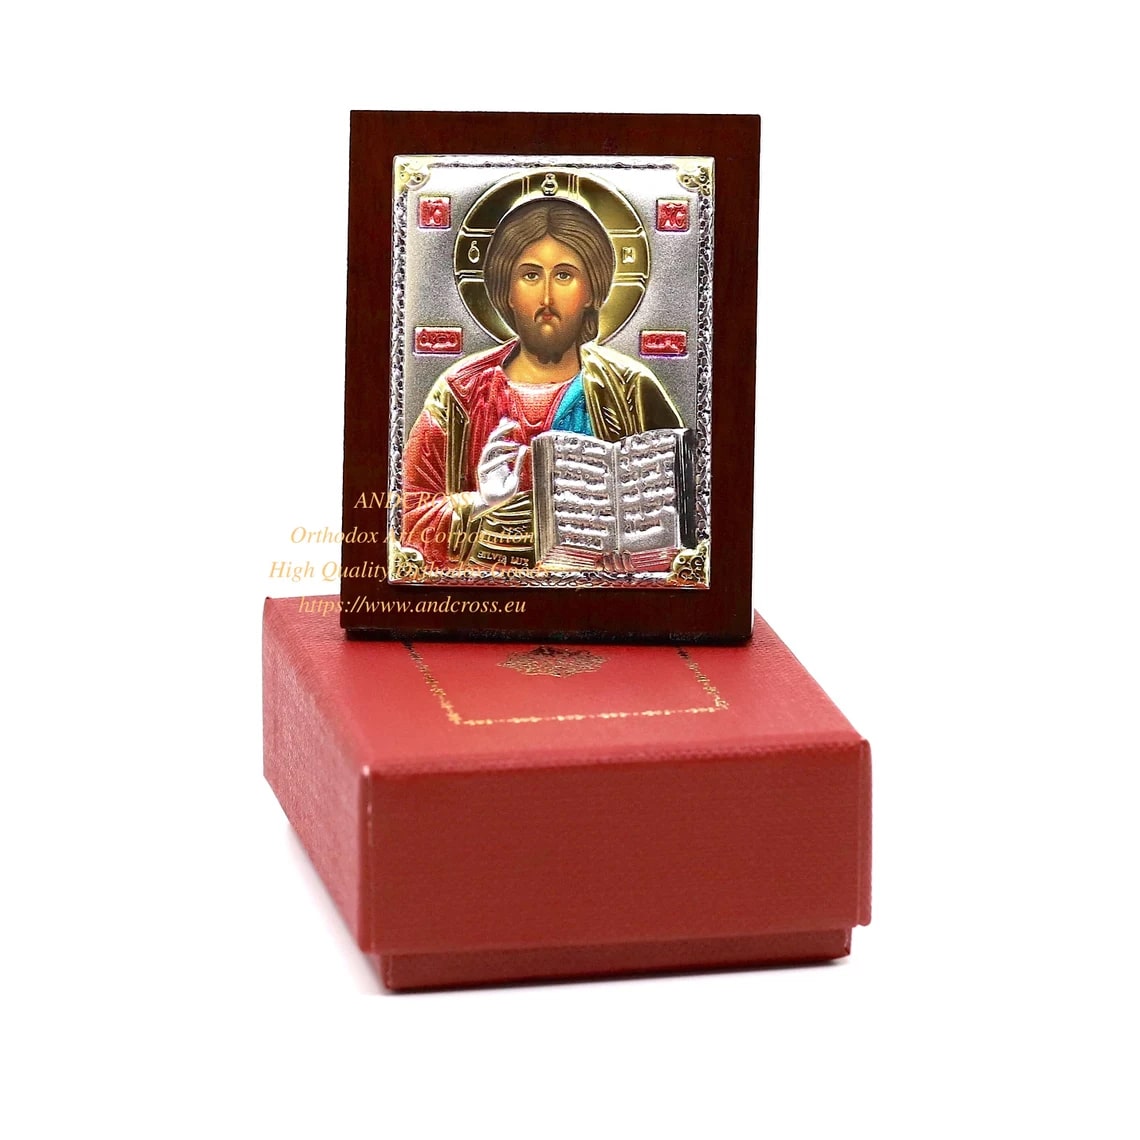 Silver Plated .999 Orthodox Icon Lord Jesus Christ Pantocrator. ( 6.4cm X 5cm ). B327|Silver Plated .999 Orthodox Icon Lord Jesus Christ Pantocrator. ( 6.4cm X 5cm ). B327|Silver Plated .999 Orthodox Icon Lord Jesus Christ Pantocrator. ( 6.4cm X 5cm ). B327|Silver Plated .999 Orthodox Icon Lord Jesus Christ Pantocrator. ( 6.4cm X 5cm ). B327